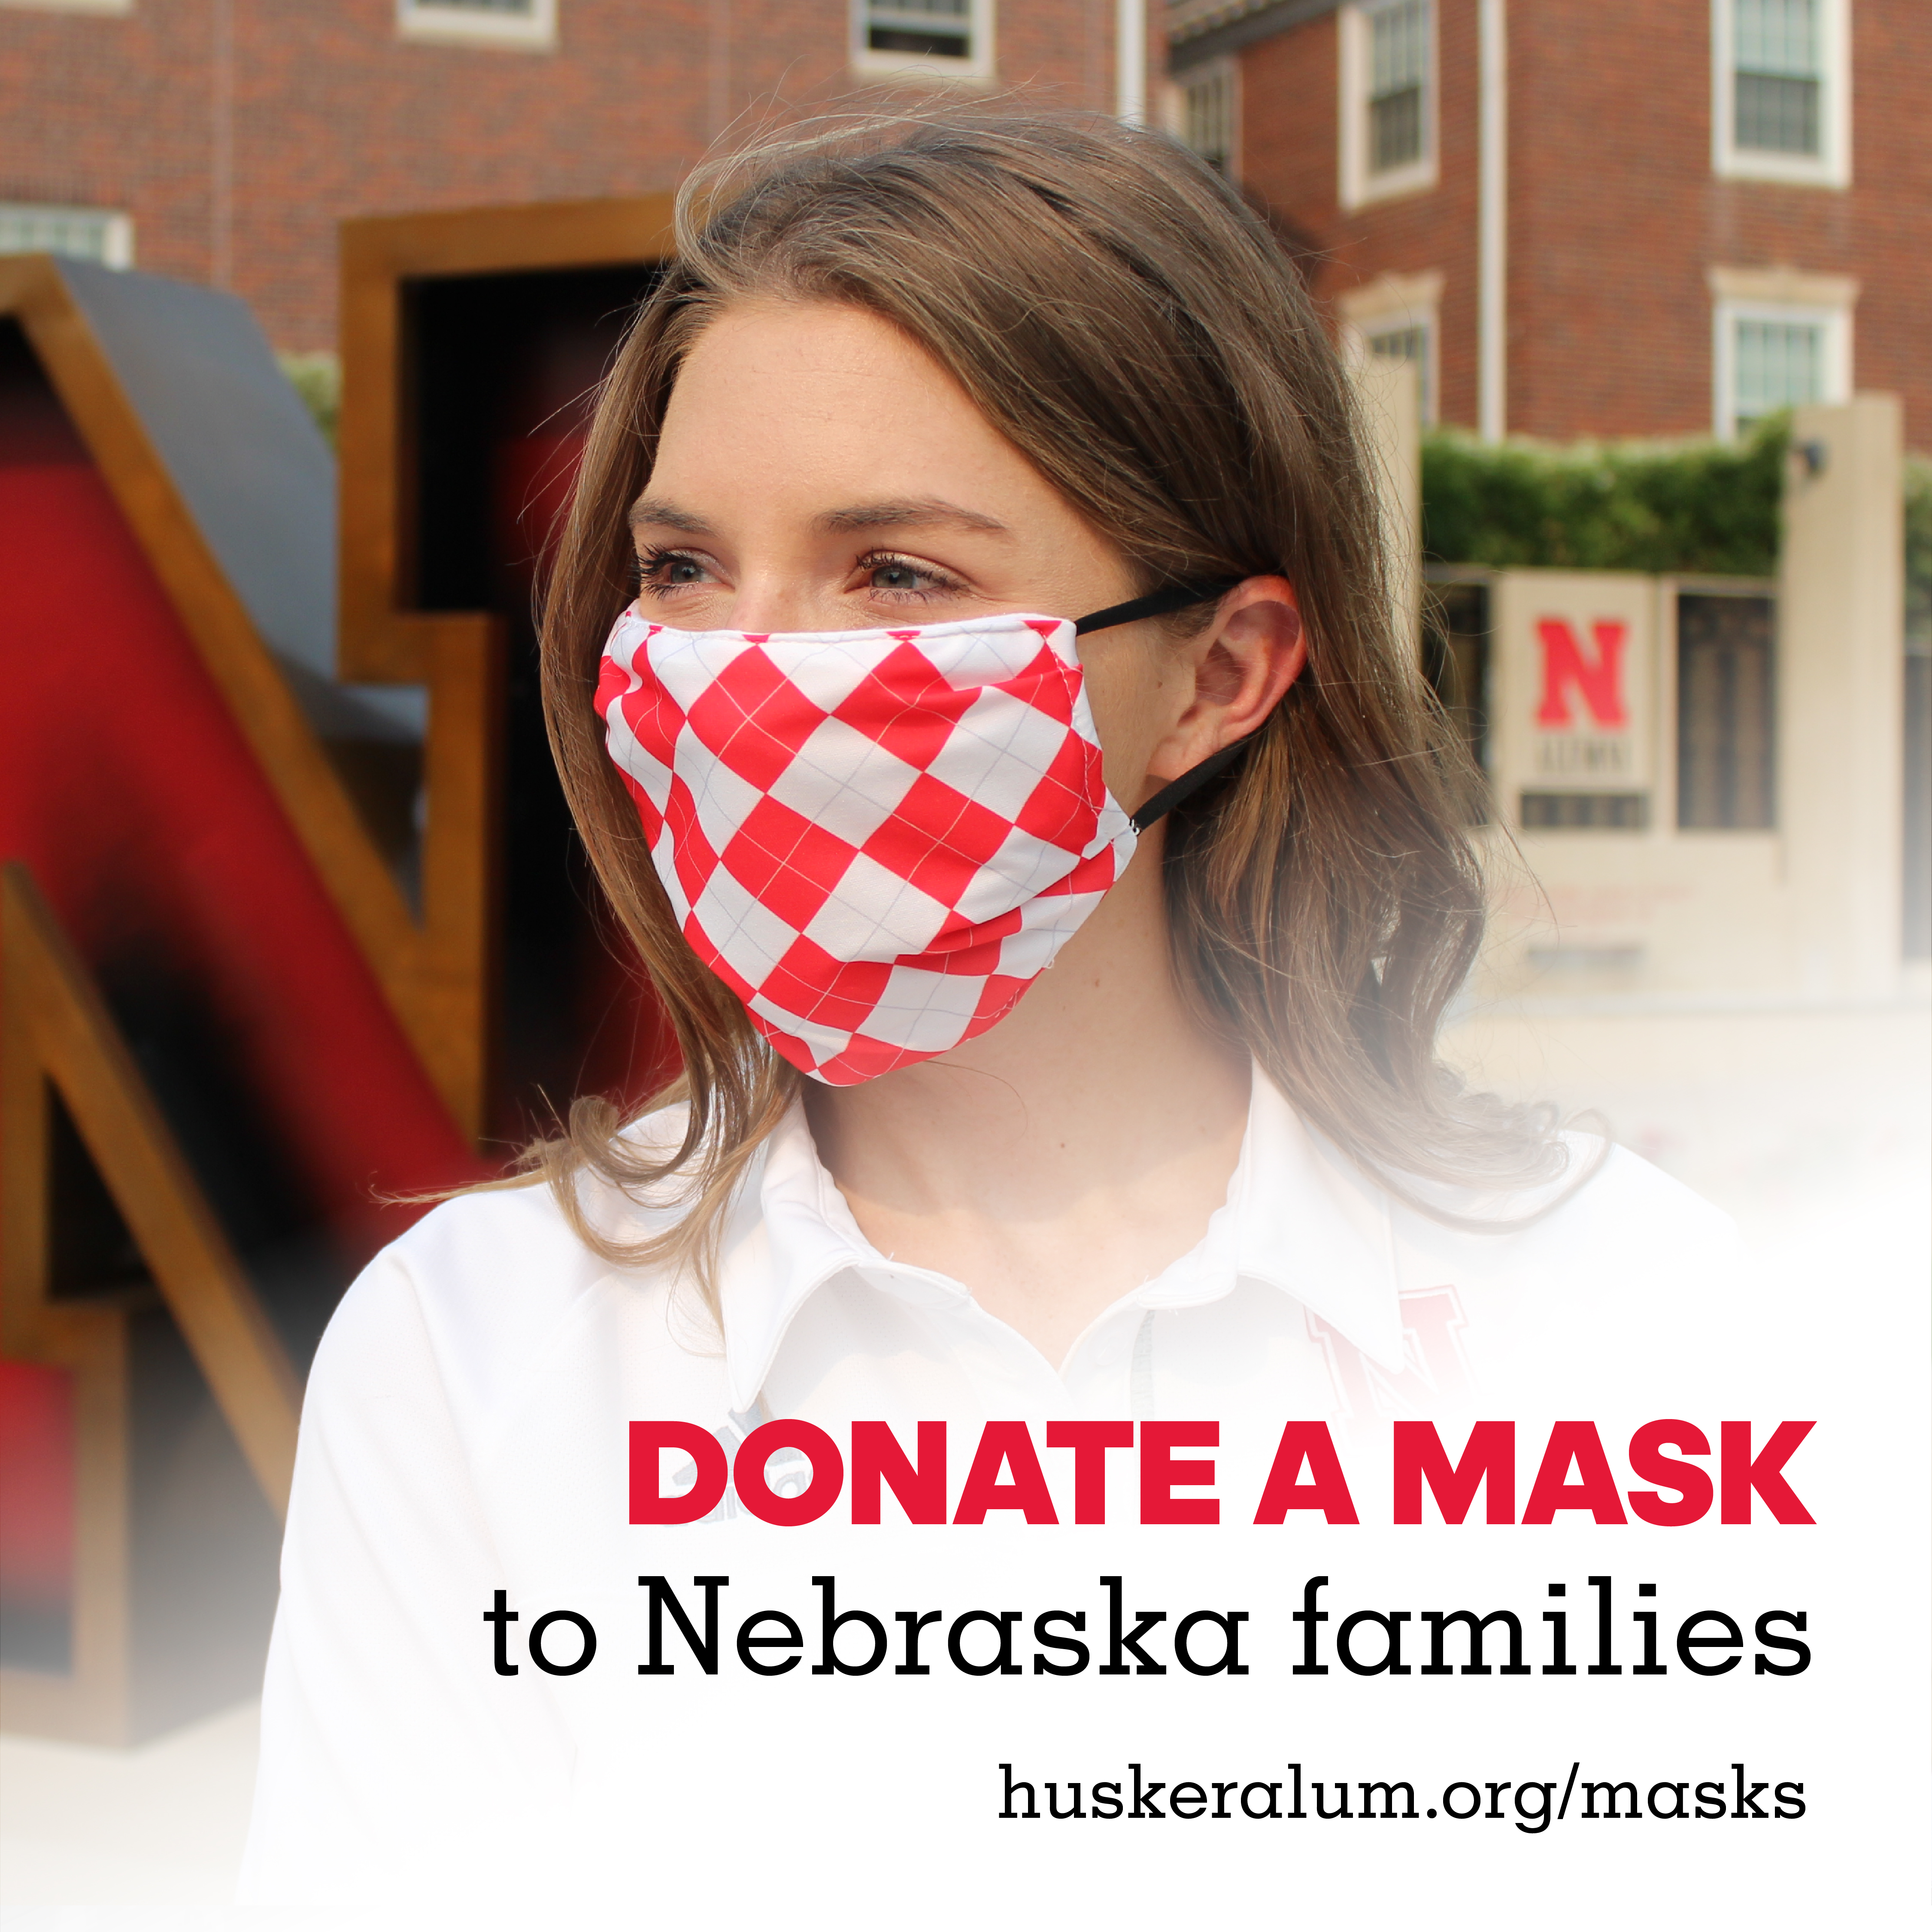 Purchase a new mask for yourself or as a gift and enjoy knowing that one will be donated as well.